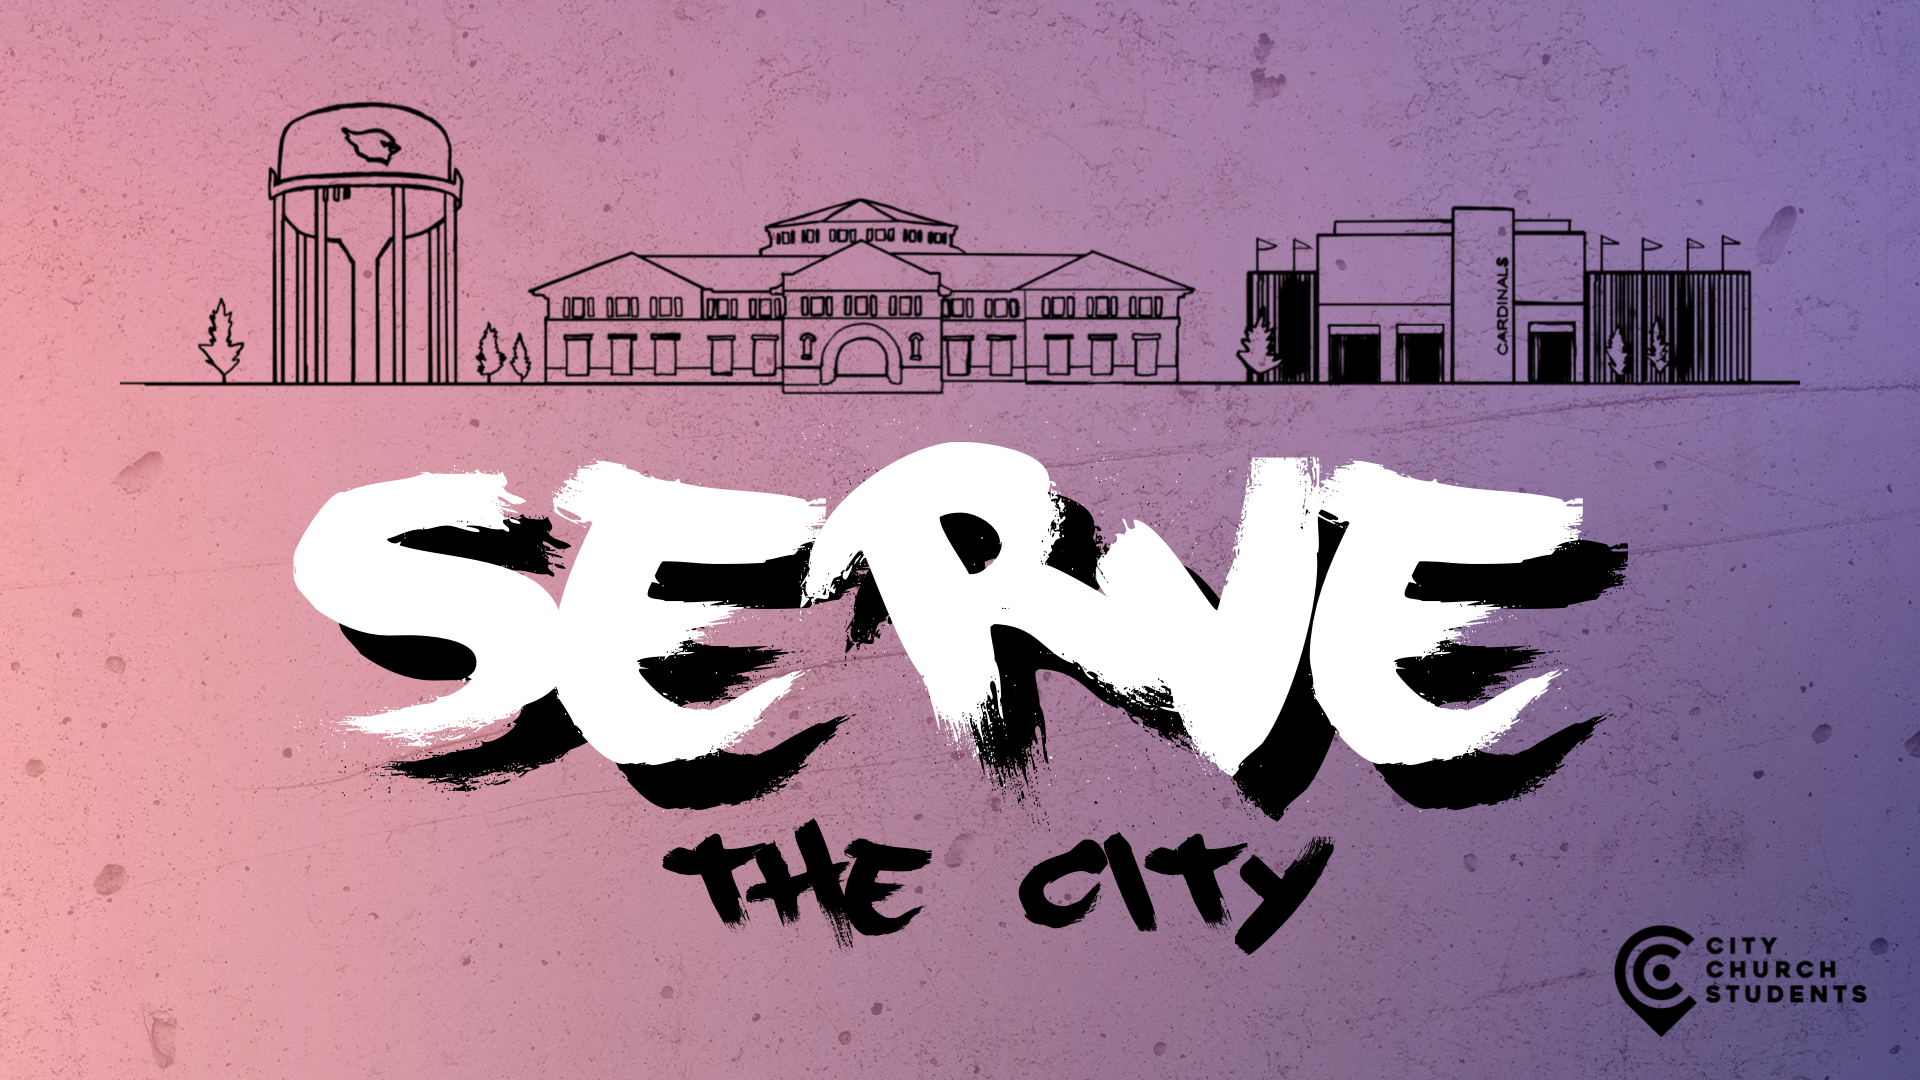 Here at City Church, we strongly value serving. Jesus came not to be served but to serve (Mark 10:45). We believe that like Jesus, we are called to serve the community and church that God has placed us in. All throughout the summer students will have a multitude of opportunities to serve (and get NHS/NJHS hours). <br><br>

Opportunities to serve:
<ul><li>Pine Cove City (June 12-16)</li> 
<li>Kids Summer Bash (June 26-28)</li>
<li>Art and Lego Camp (July 19)</li> 
<li>Night of Prayer (July 20)</li> 
<li>Music and Theater Camp (July 24-27)</li> 
<li>DR Mission Trip (July 22-28) </li>